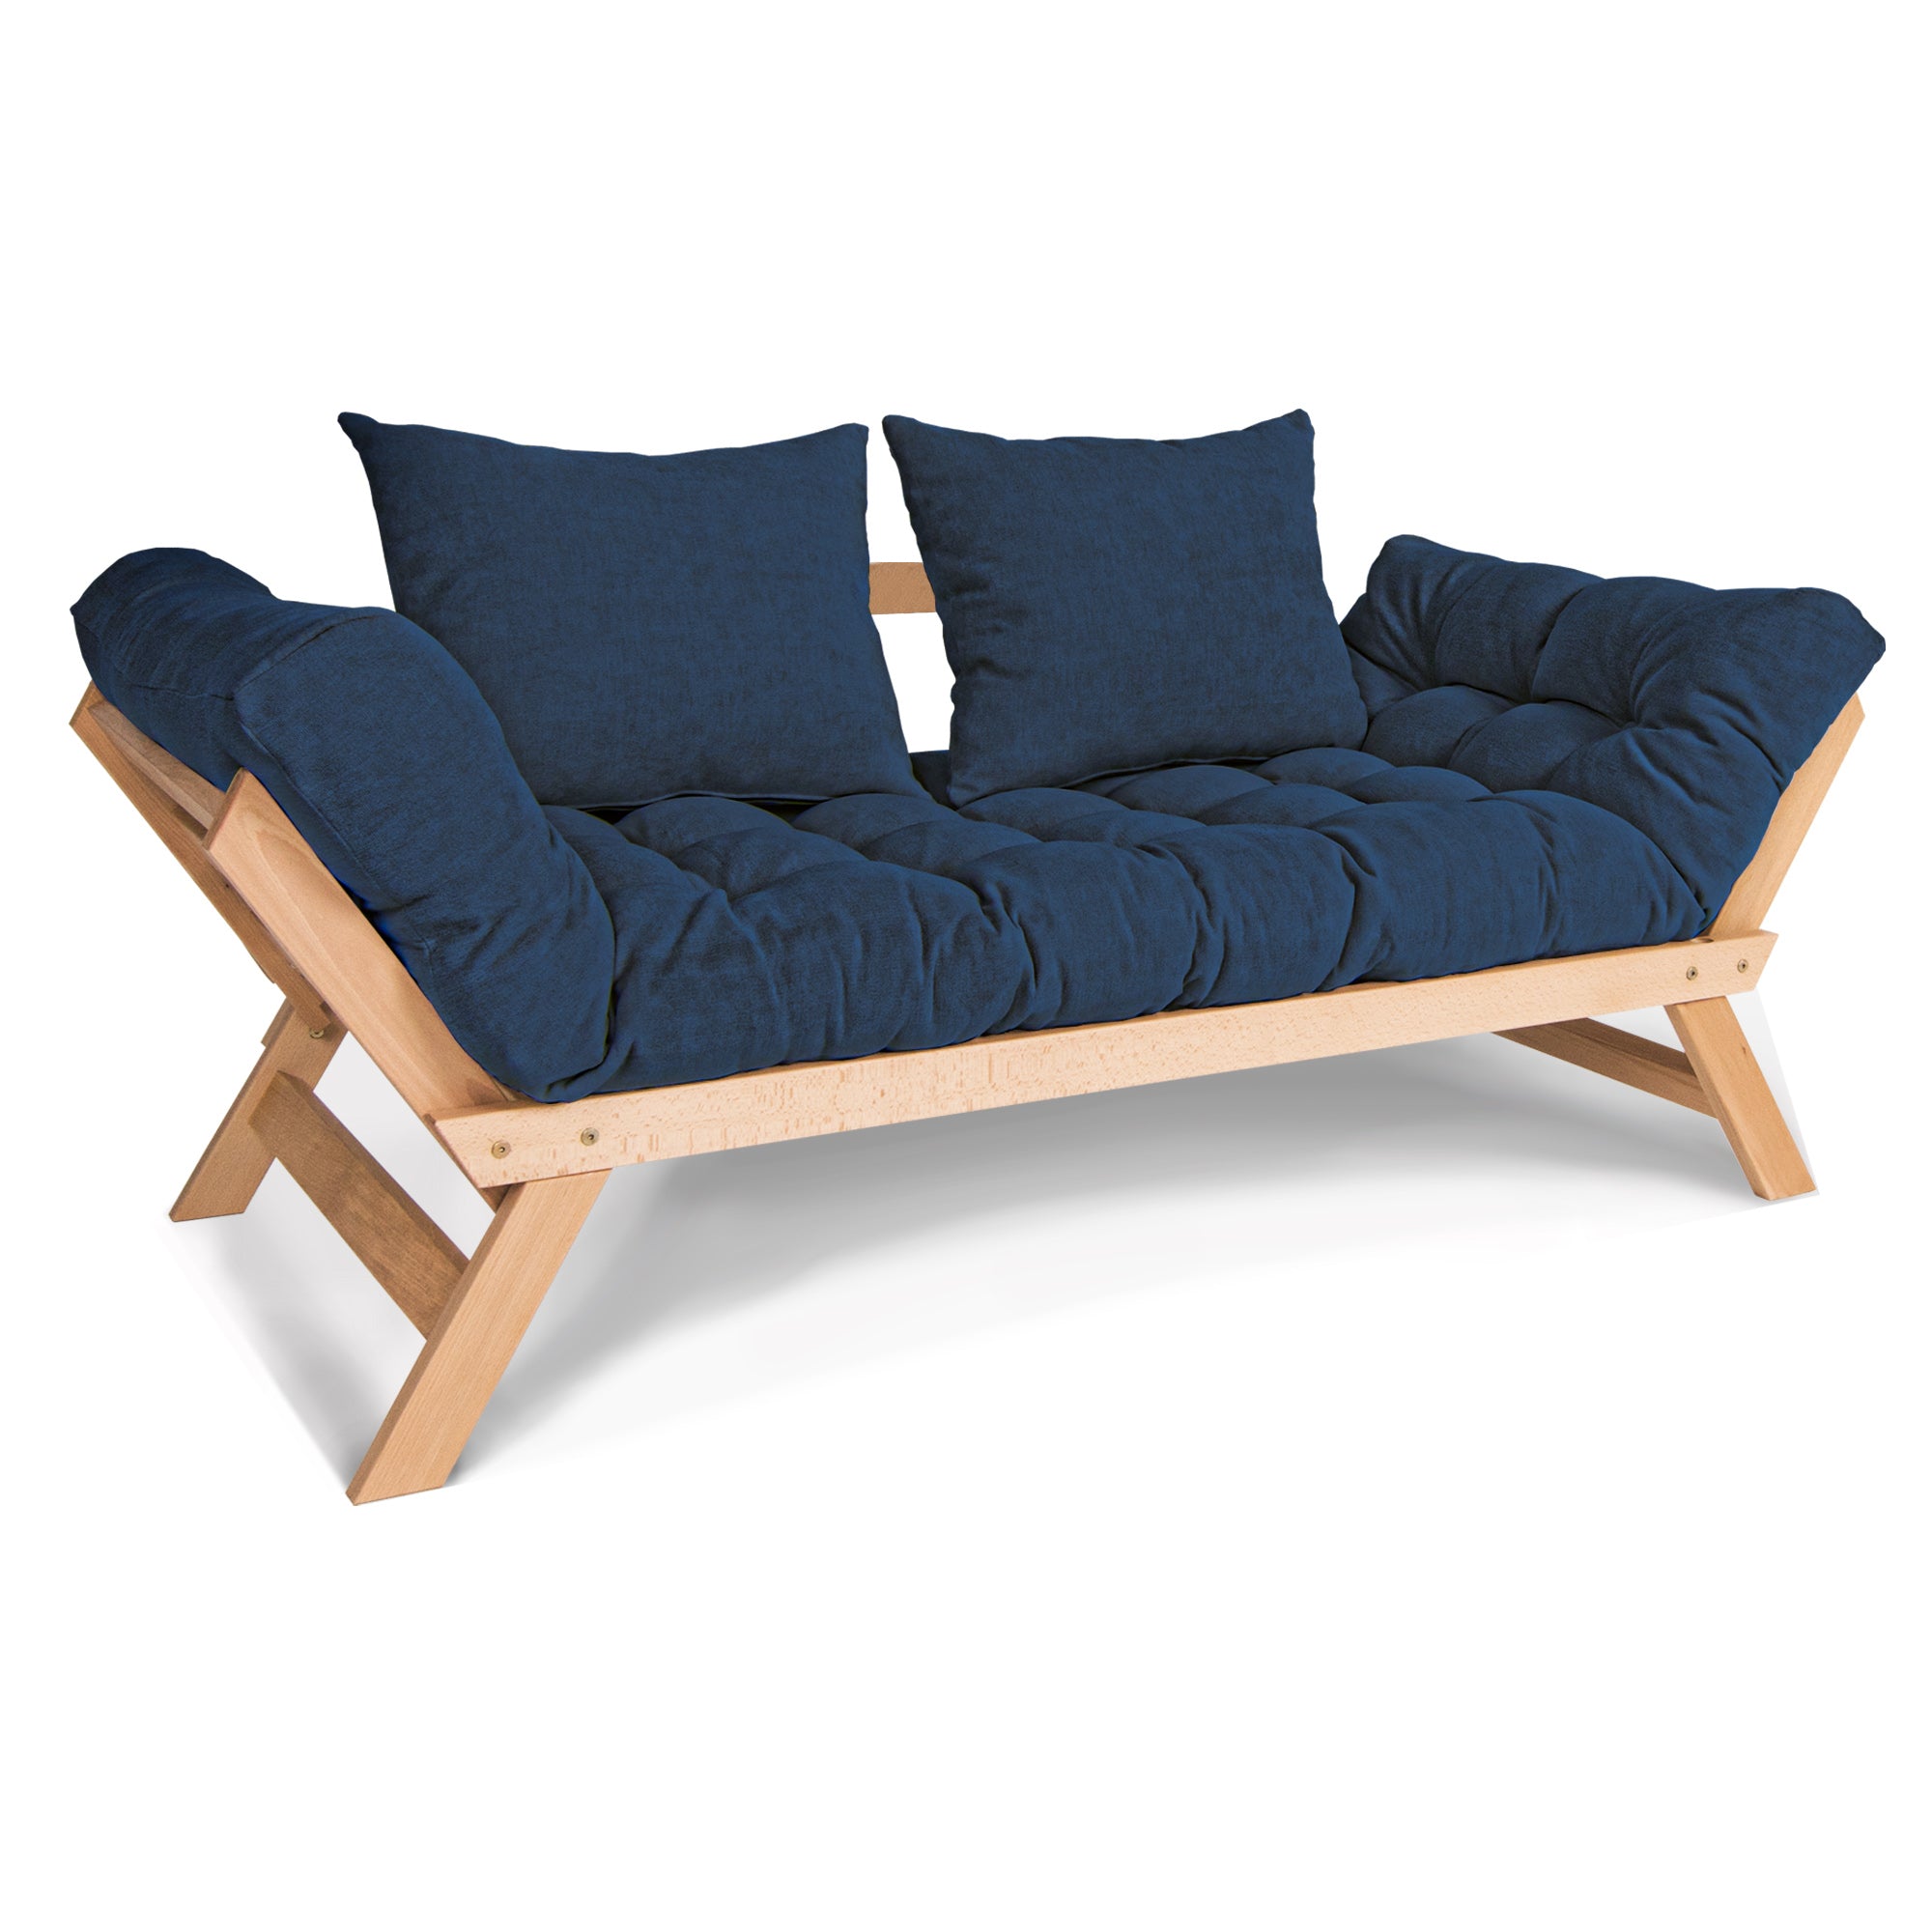 ALLEGRO Folding Sofa Bed, Beech Wood Frame, Natural Colour upholstery colour  blue